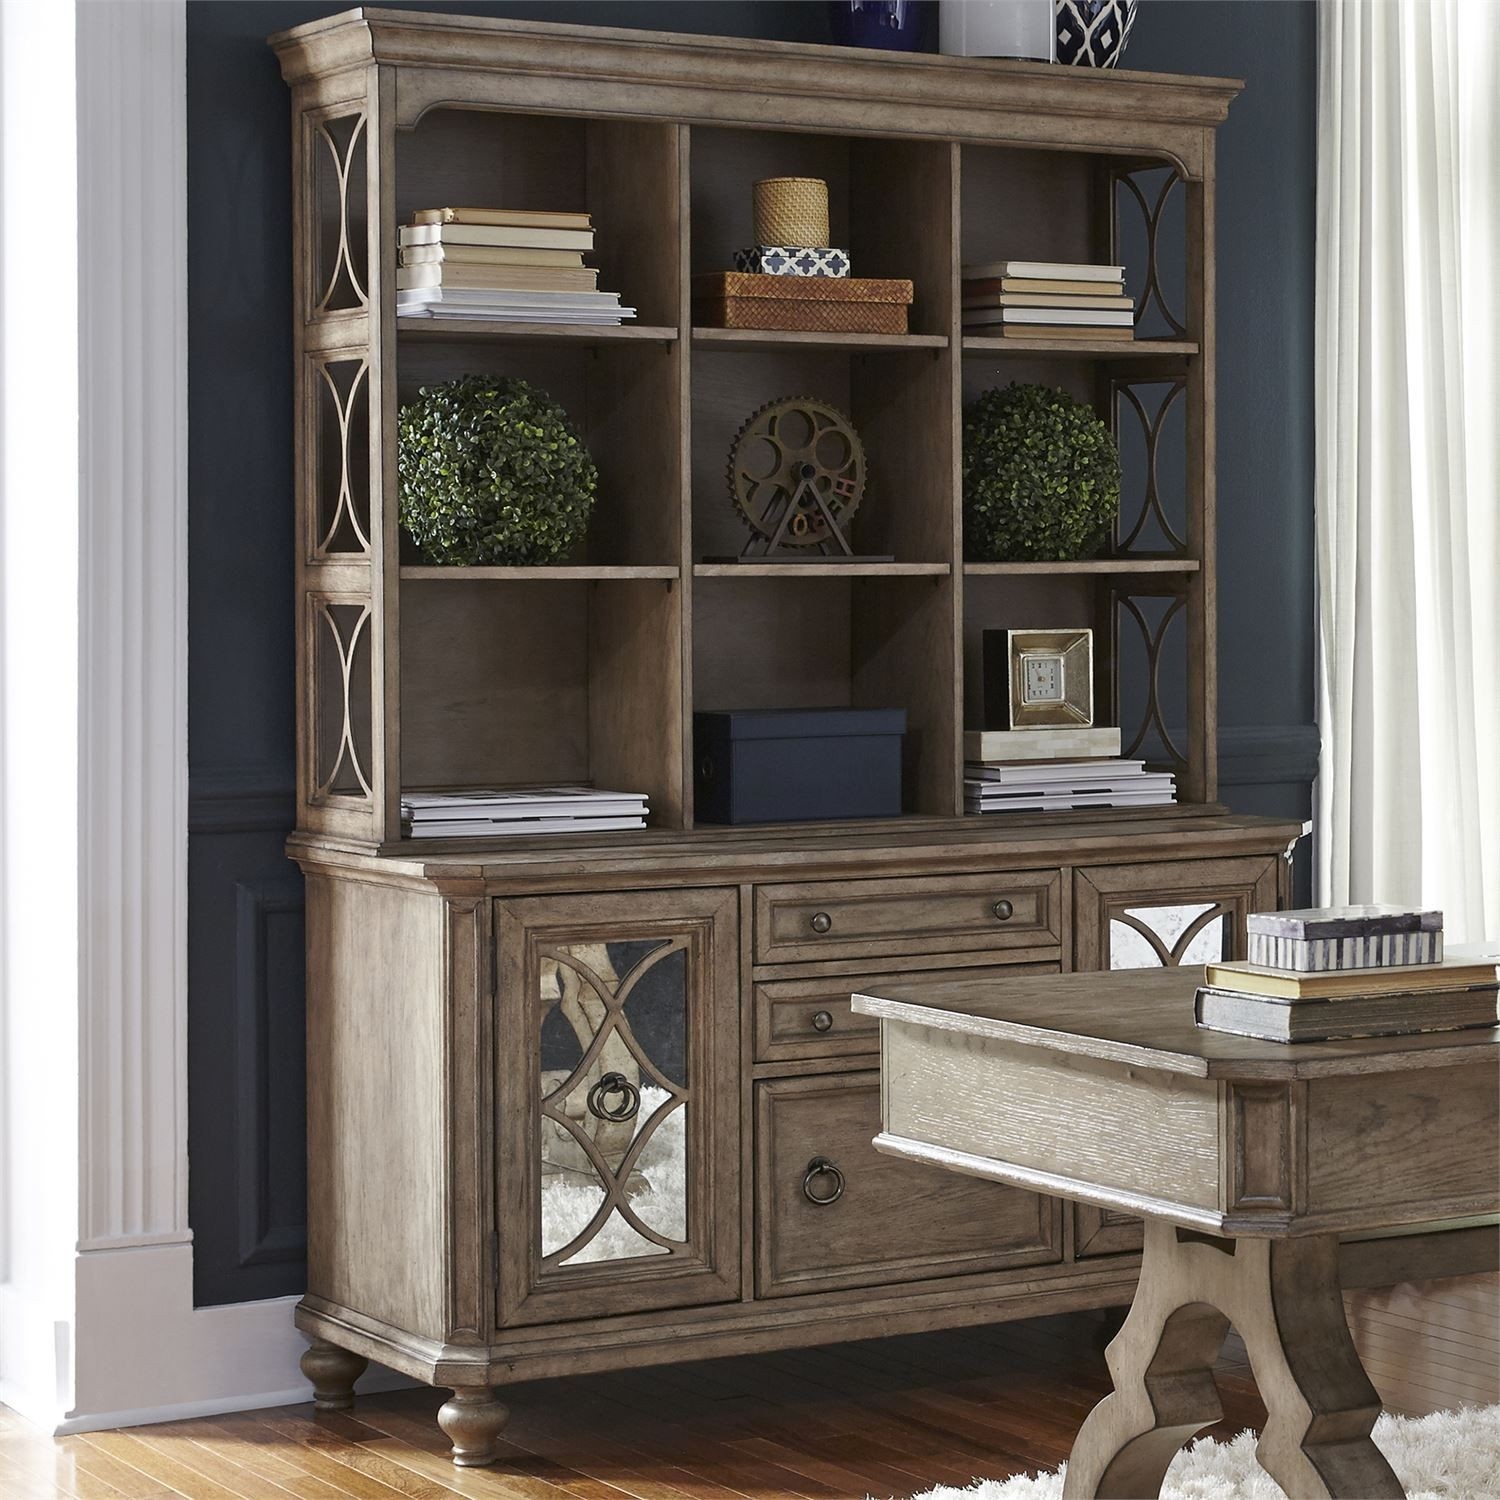 Simply Elegant Credenza Hutch by Liberty Furniture. HUTCH ONLY